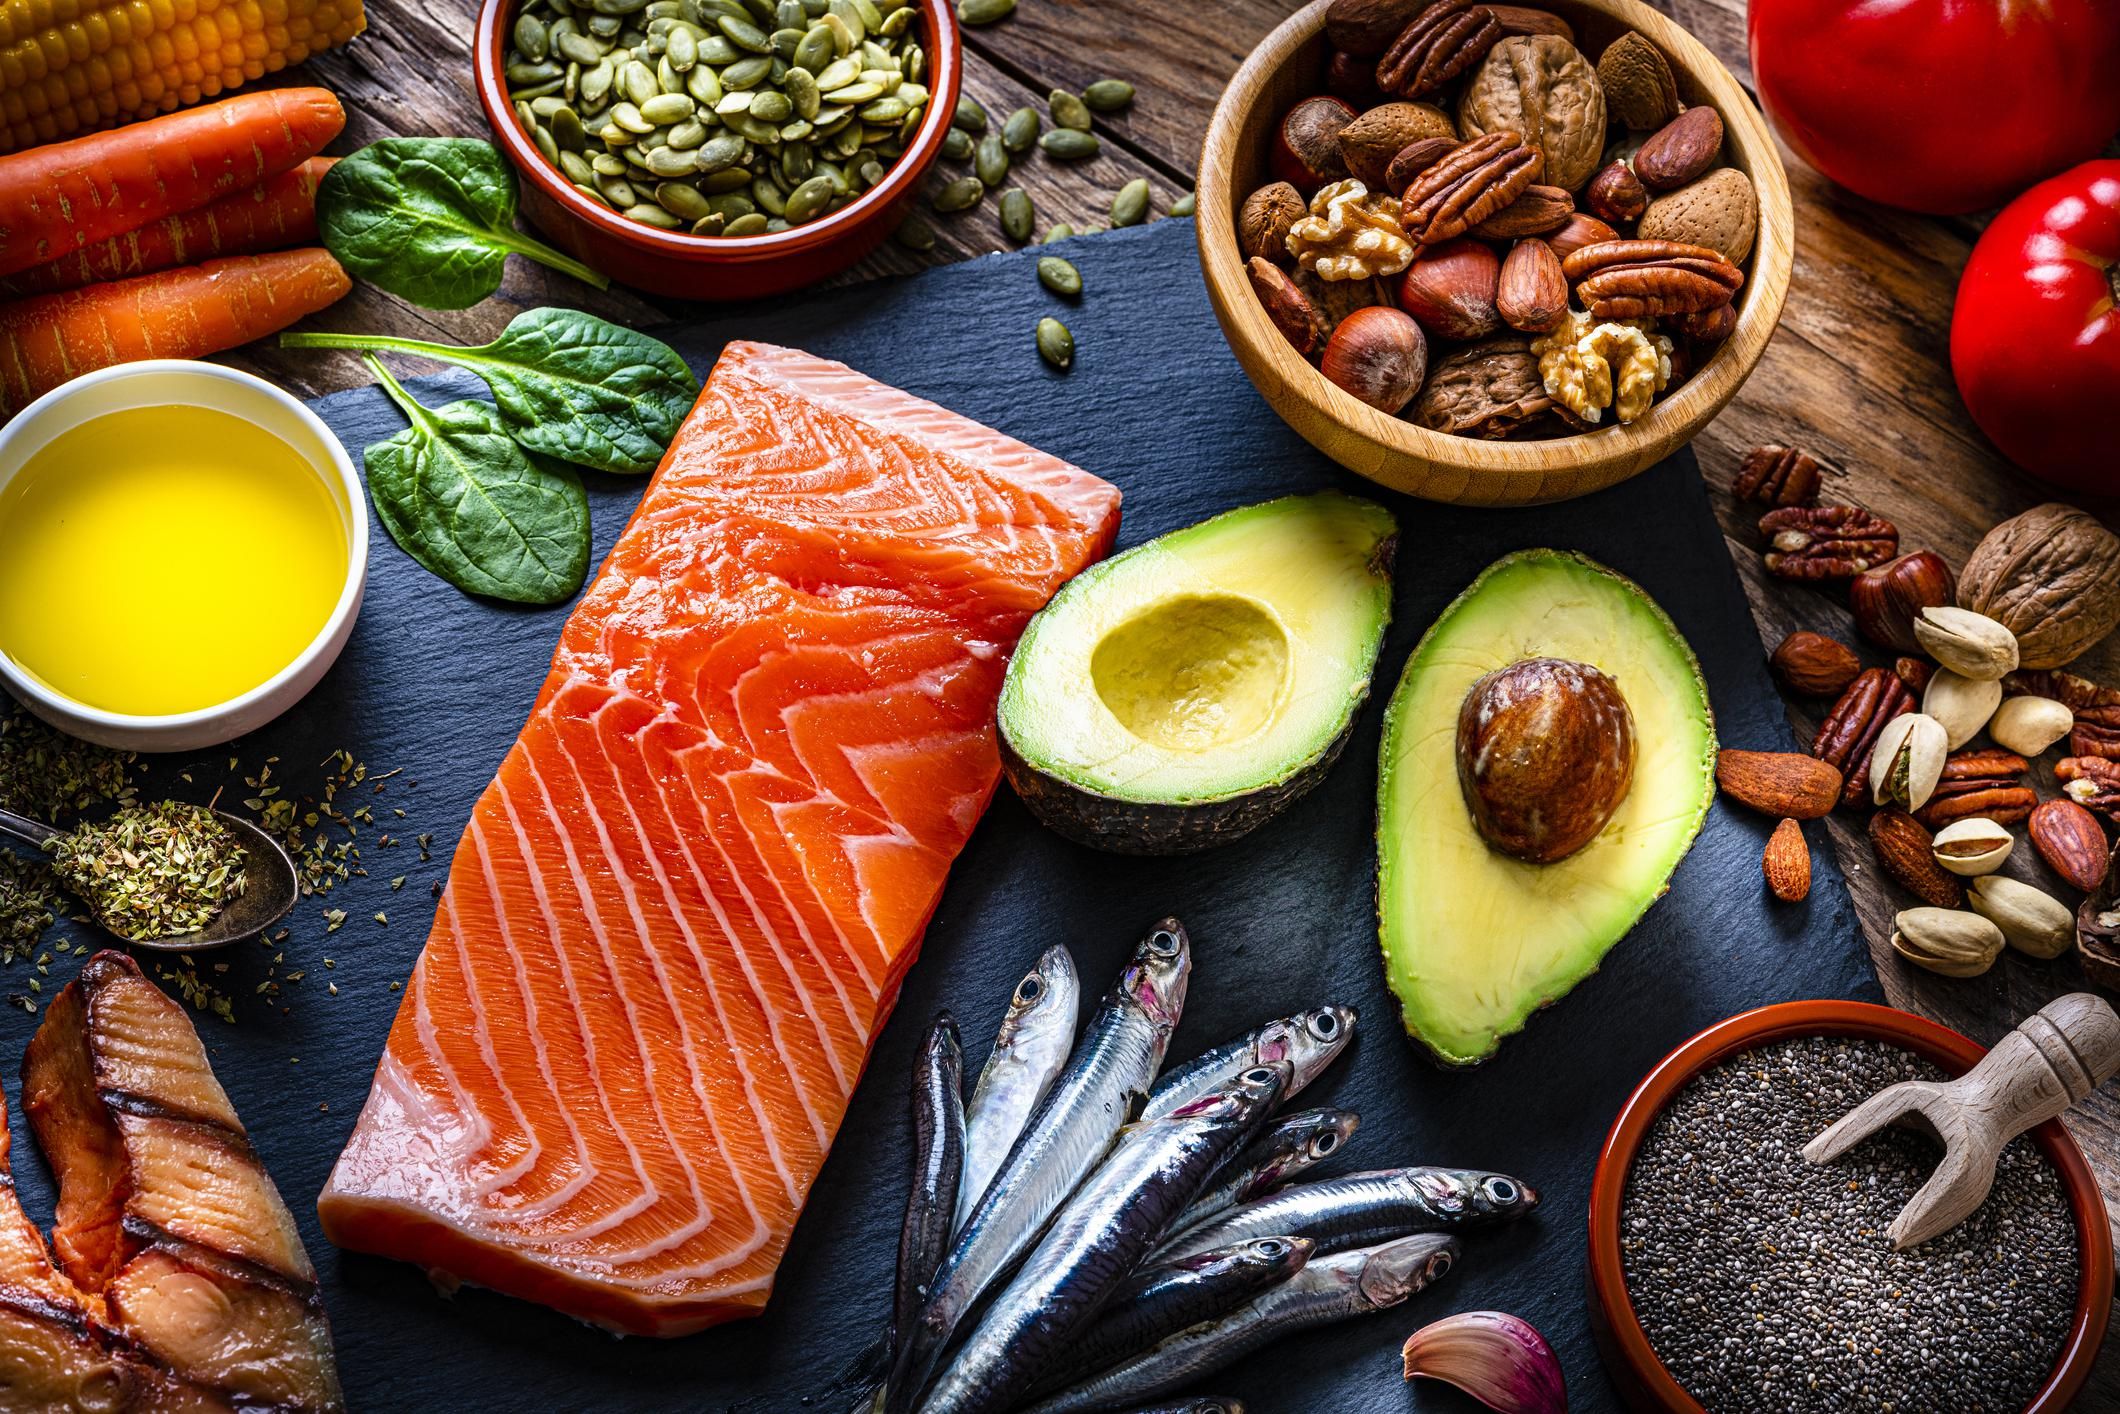 view of a group of food with high levels of Omega-3 fat